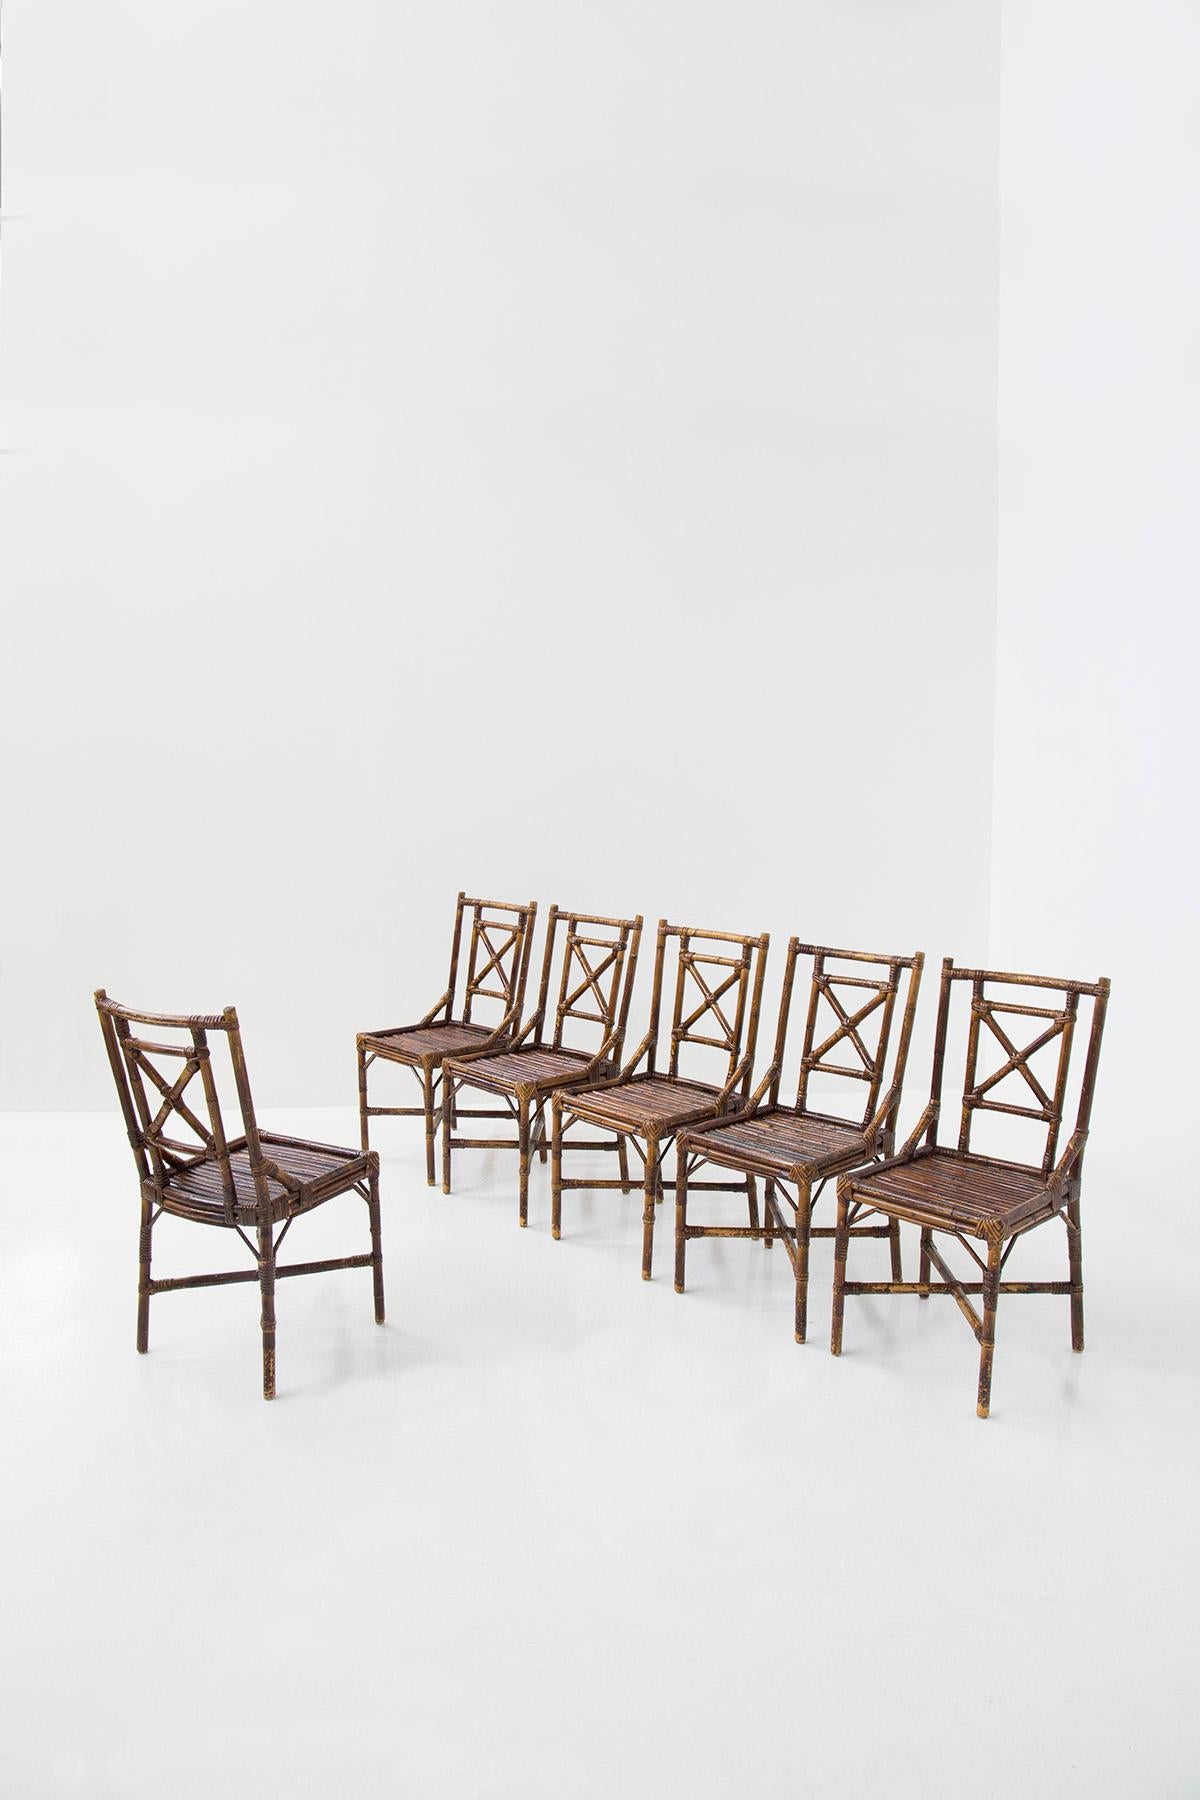 Elegant and in Bohemian style we offer a set of 6 chairs made by the great Italian manufacture VIVAI DEL SUD. The set is from the 1970s. The set is strictly made of varnished bamboo cane. The great skill in the composition and workmanship of the